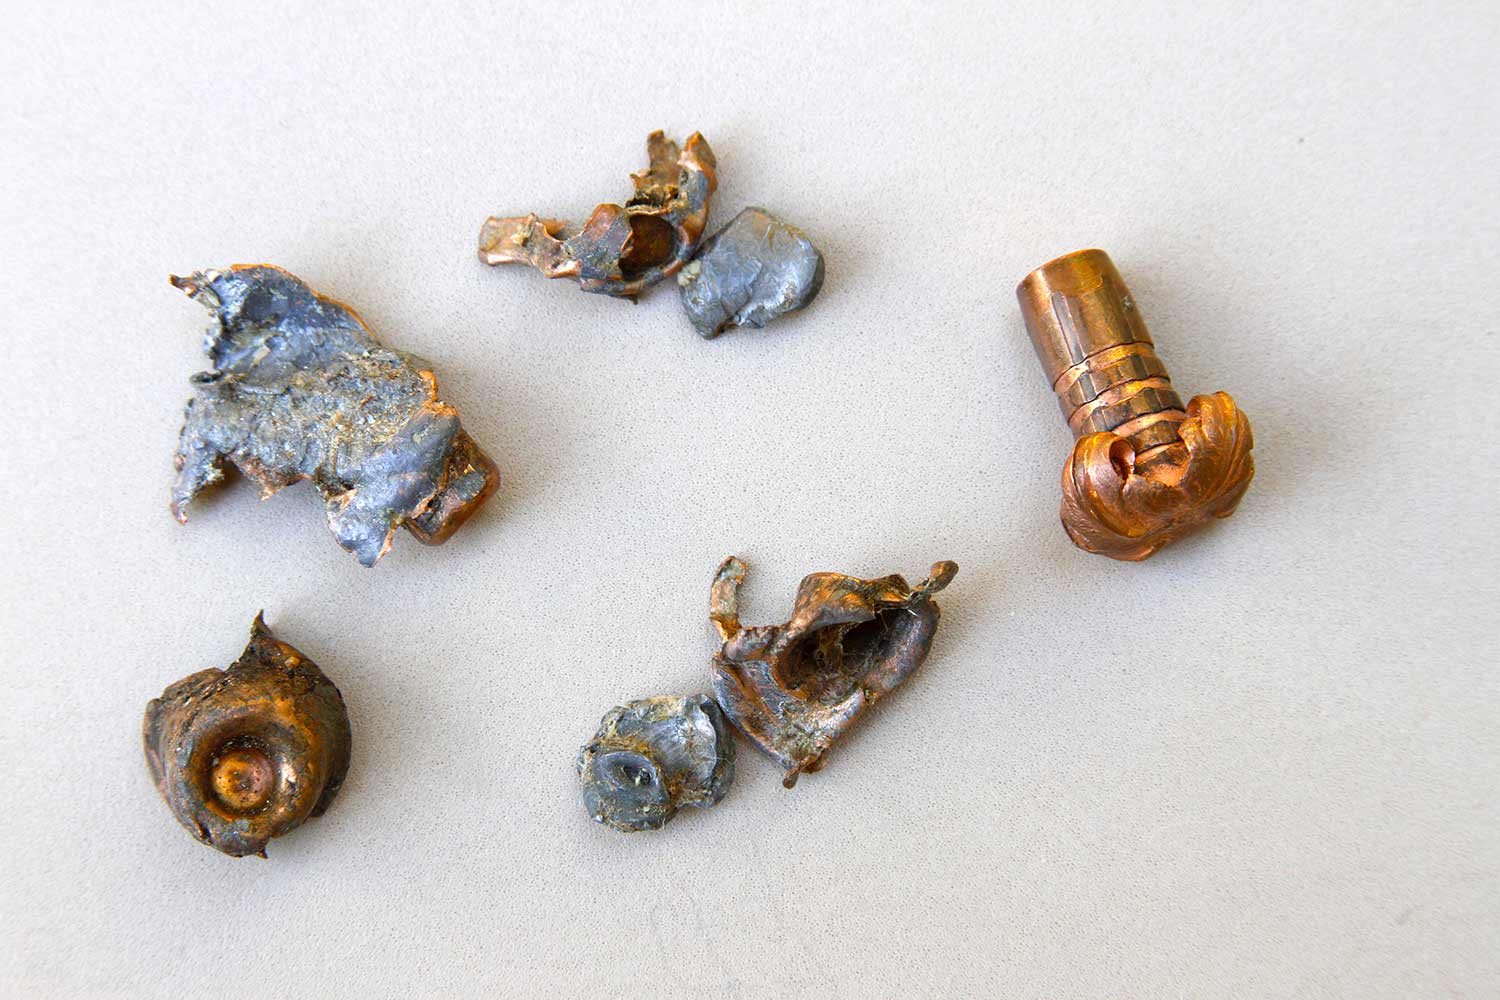 examples of high-impact pressure on bullets.